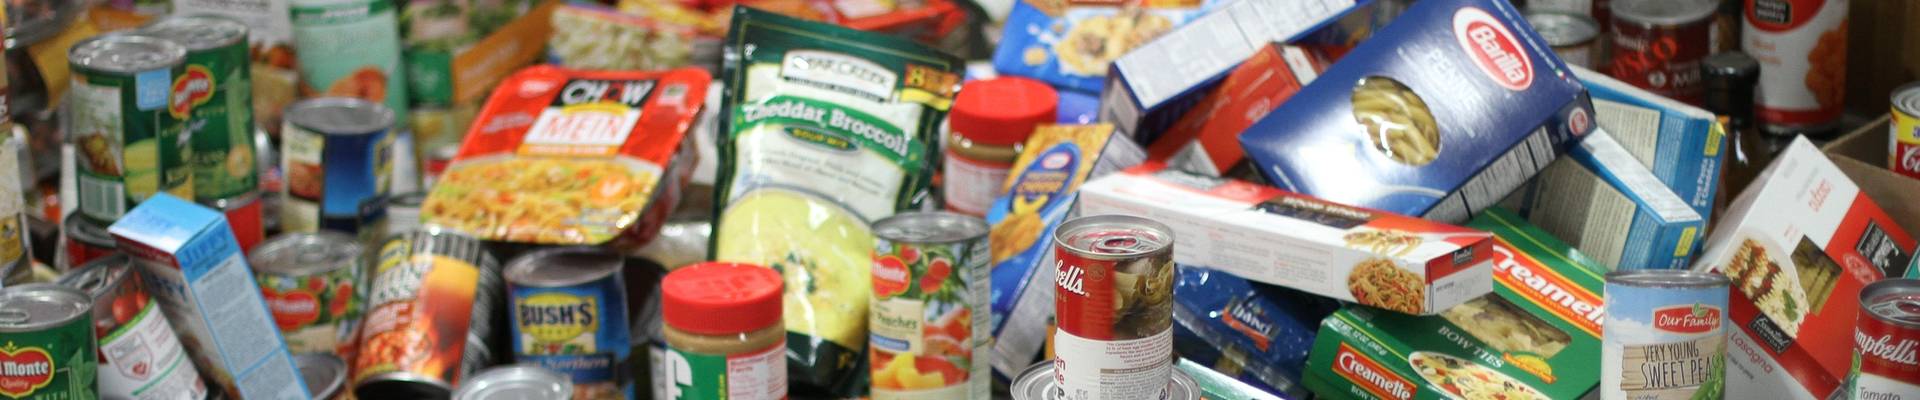 Food pile of donated cans and nonparishable foods